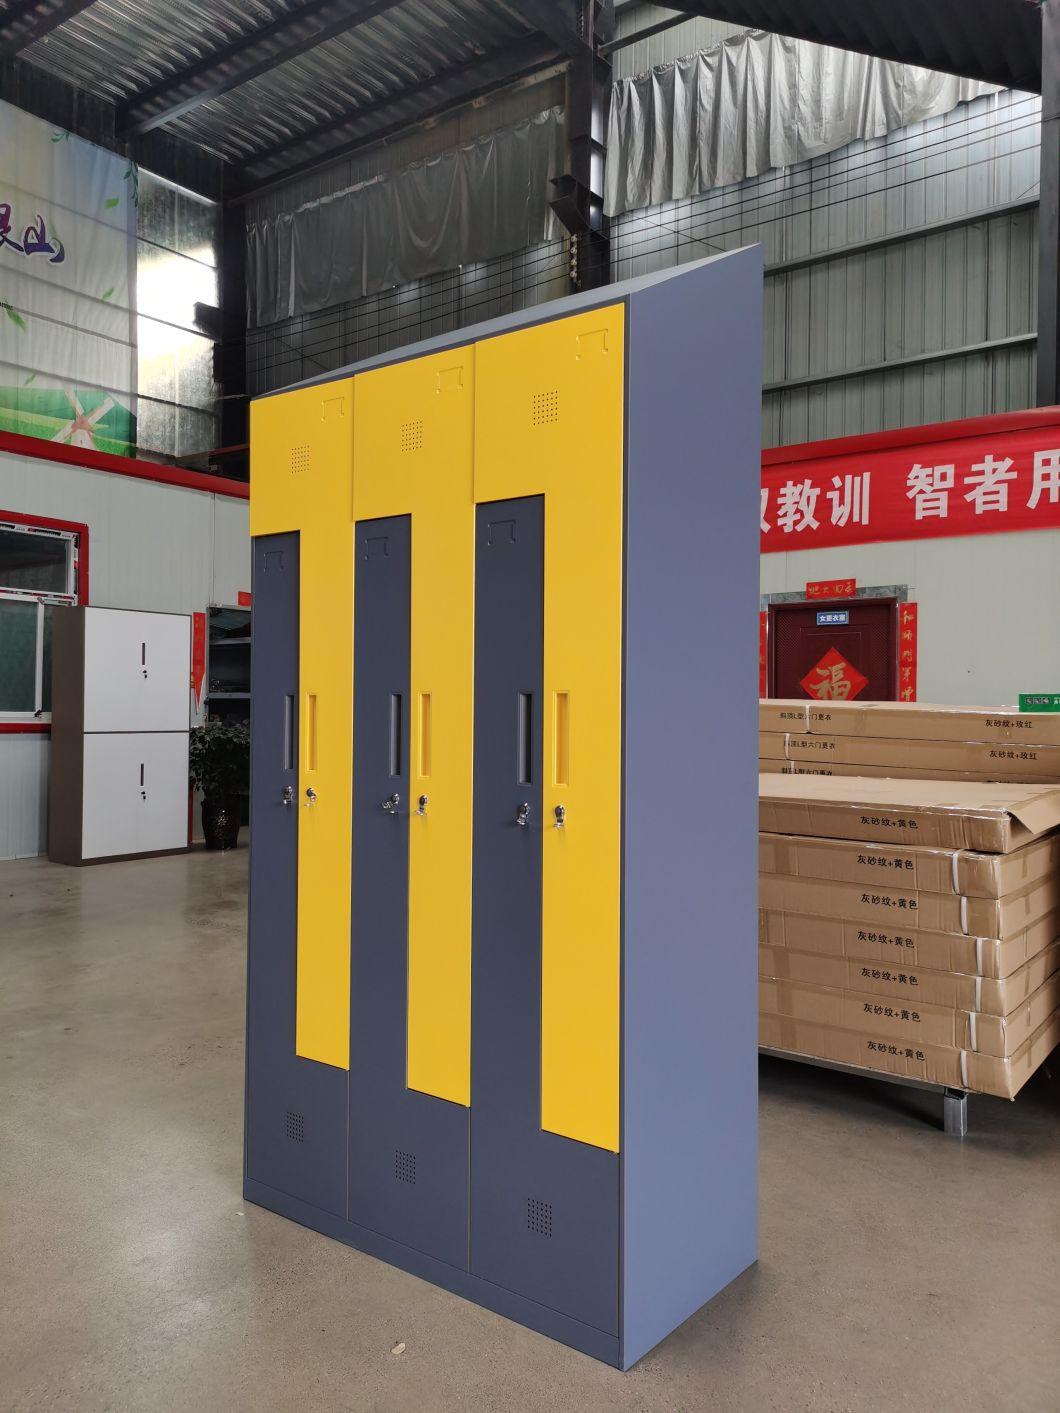 Gym Changing Room Use Z Shape Door Steel Wardrobe Locker Metal Clothes Cabinet with Slope